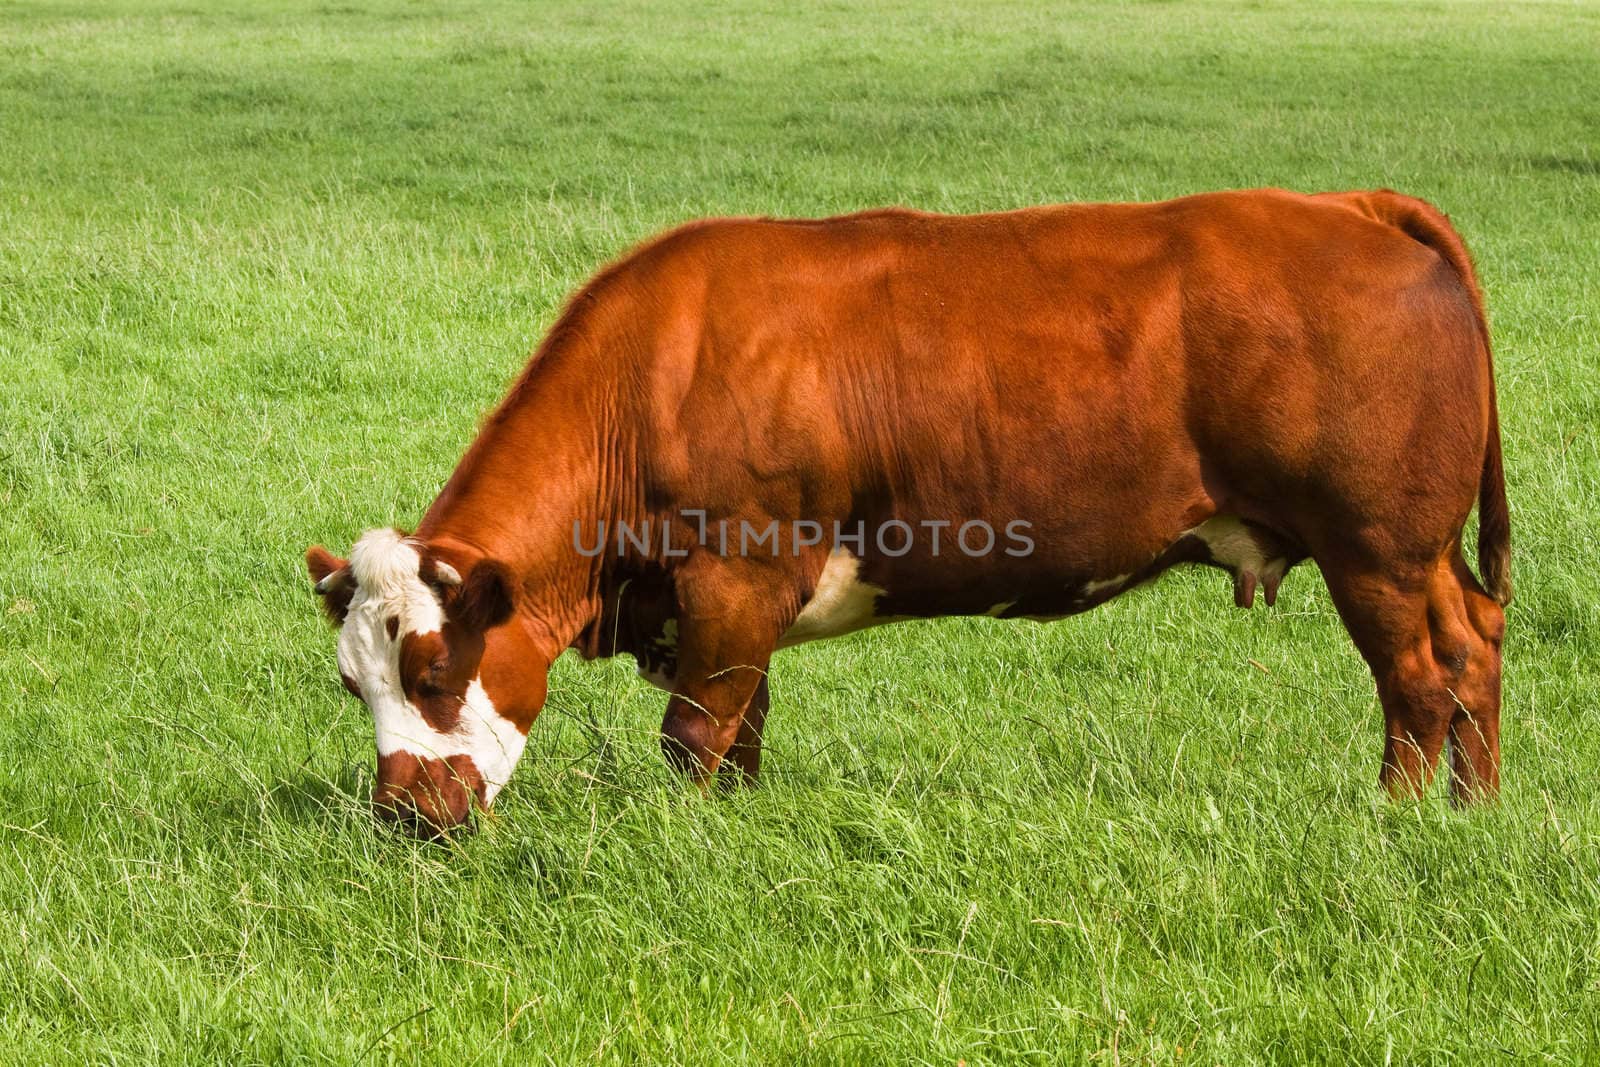 Grassland with grazing meat cow on sunny summerday in the country